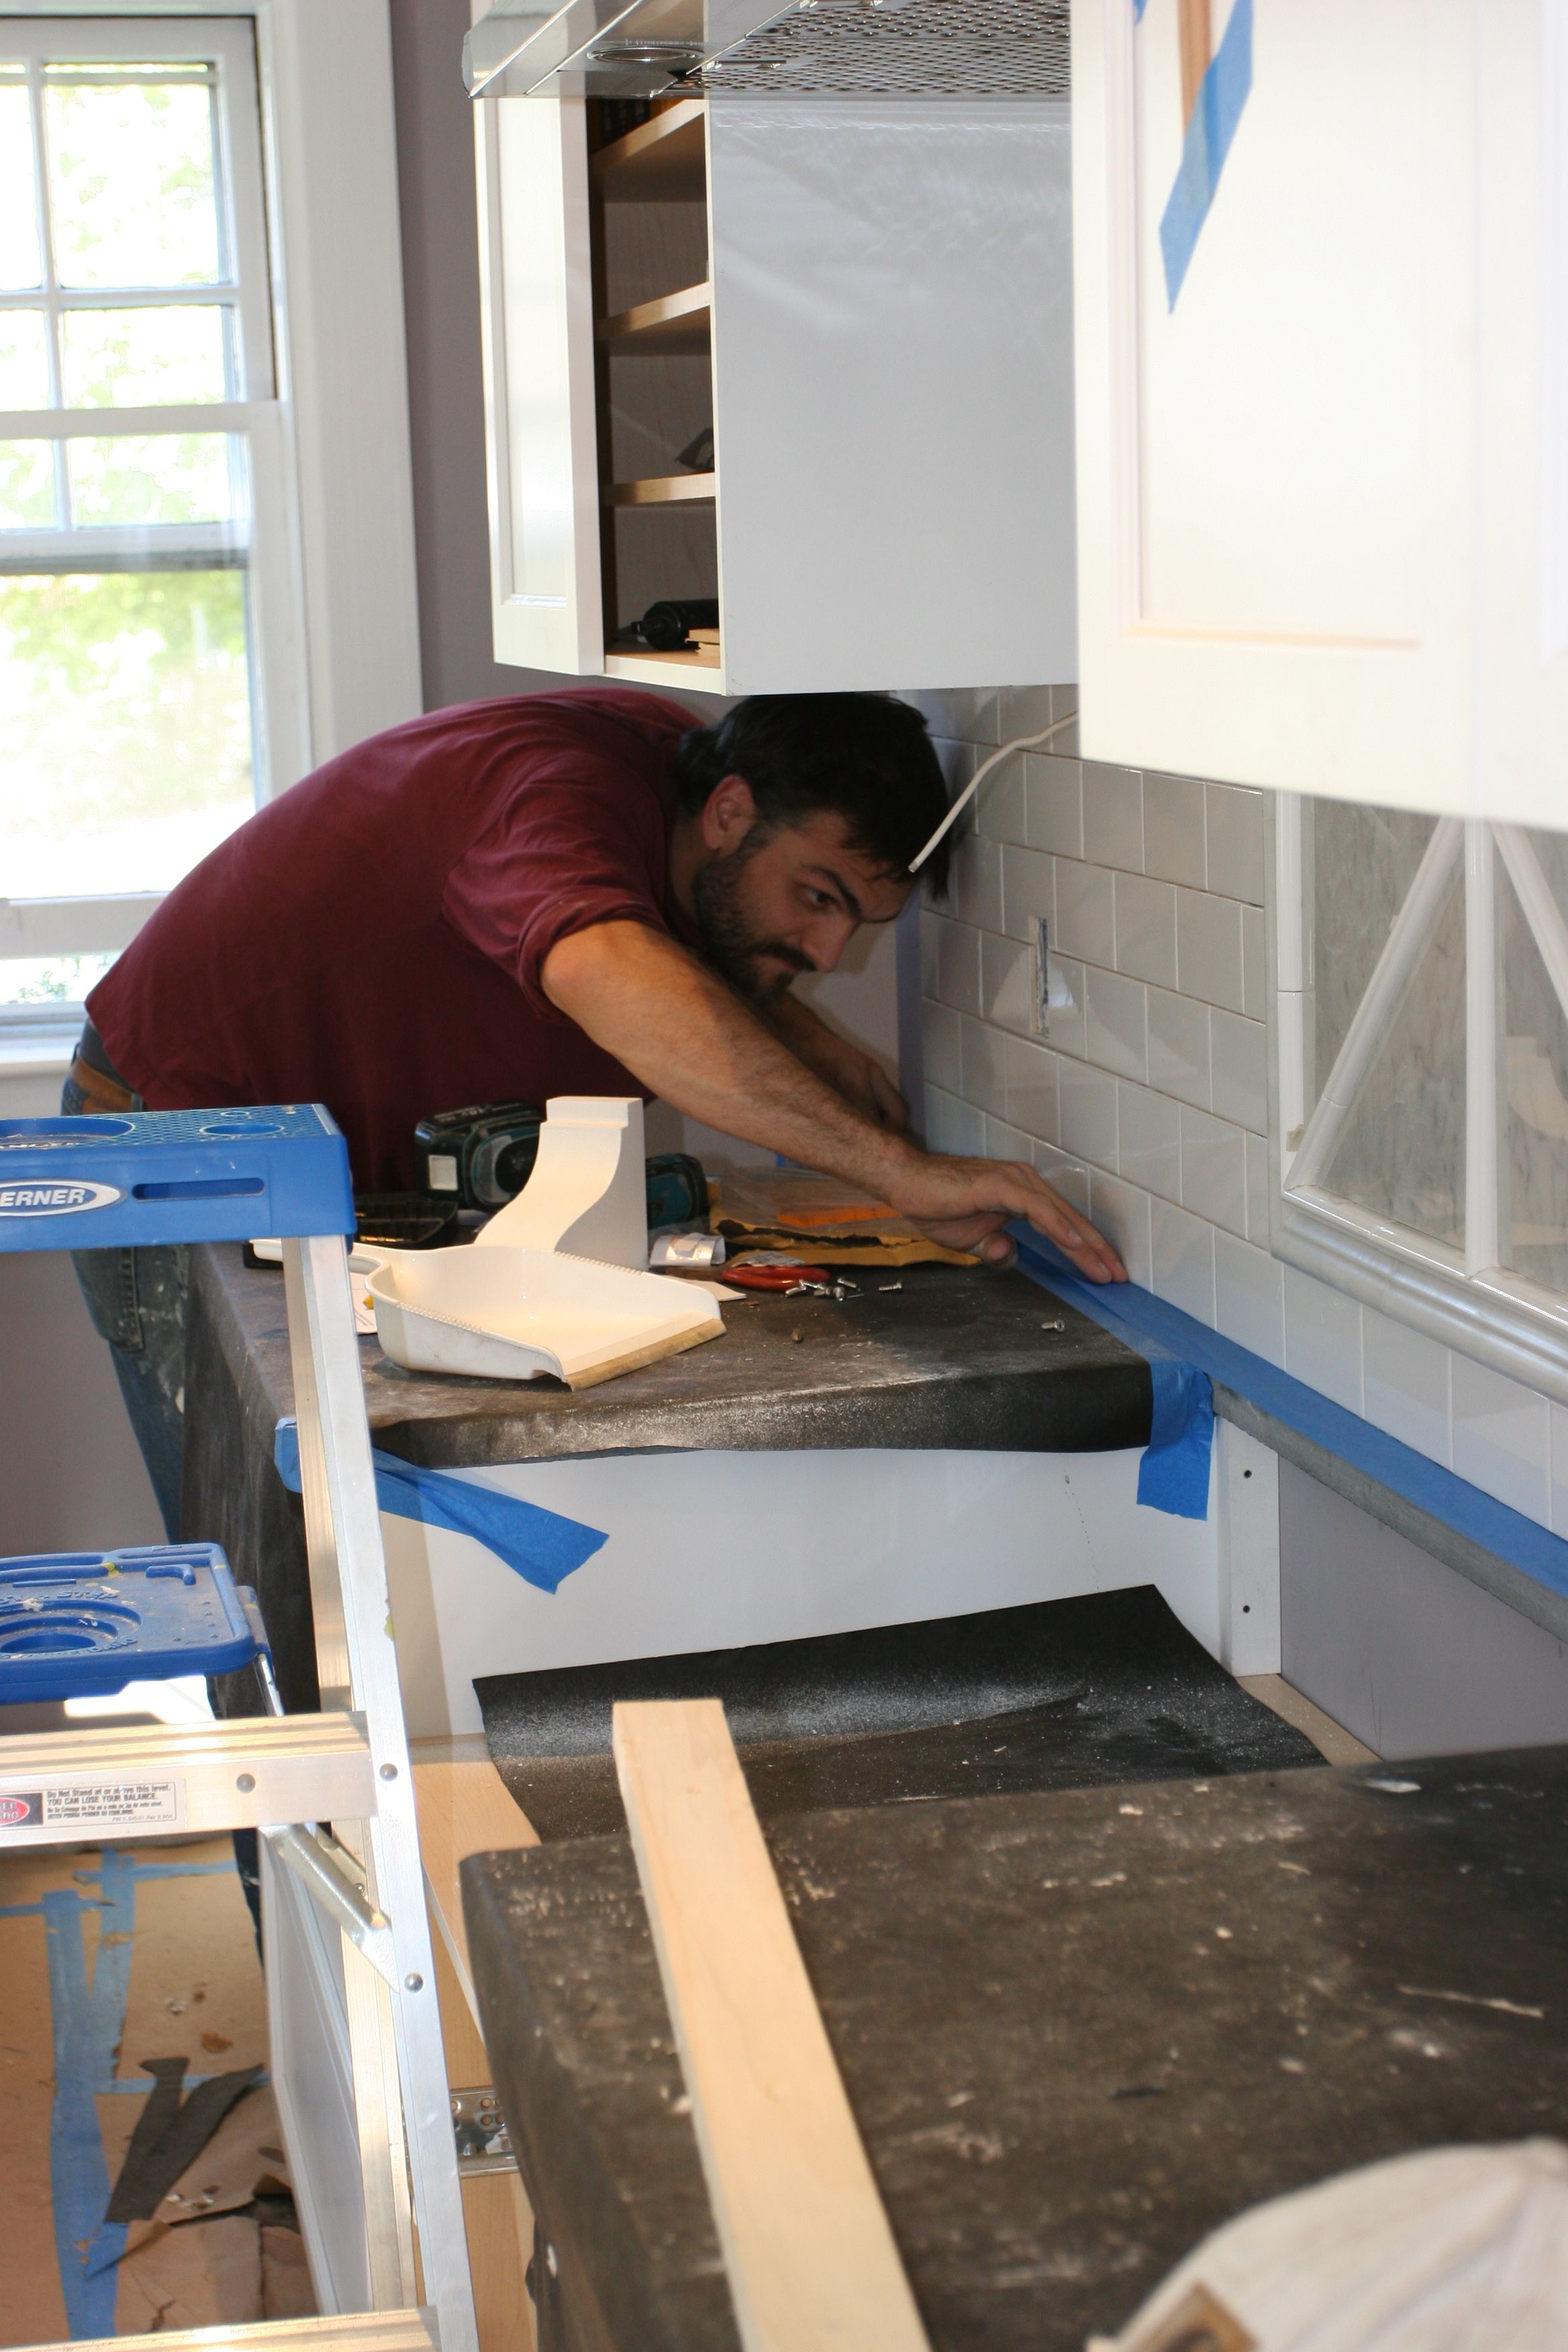 Caleb laying down some blue tape to protect our countertops from errant grout (or sealer, later).